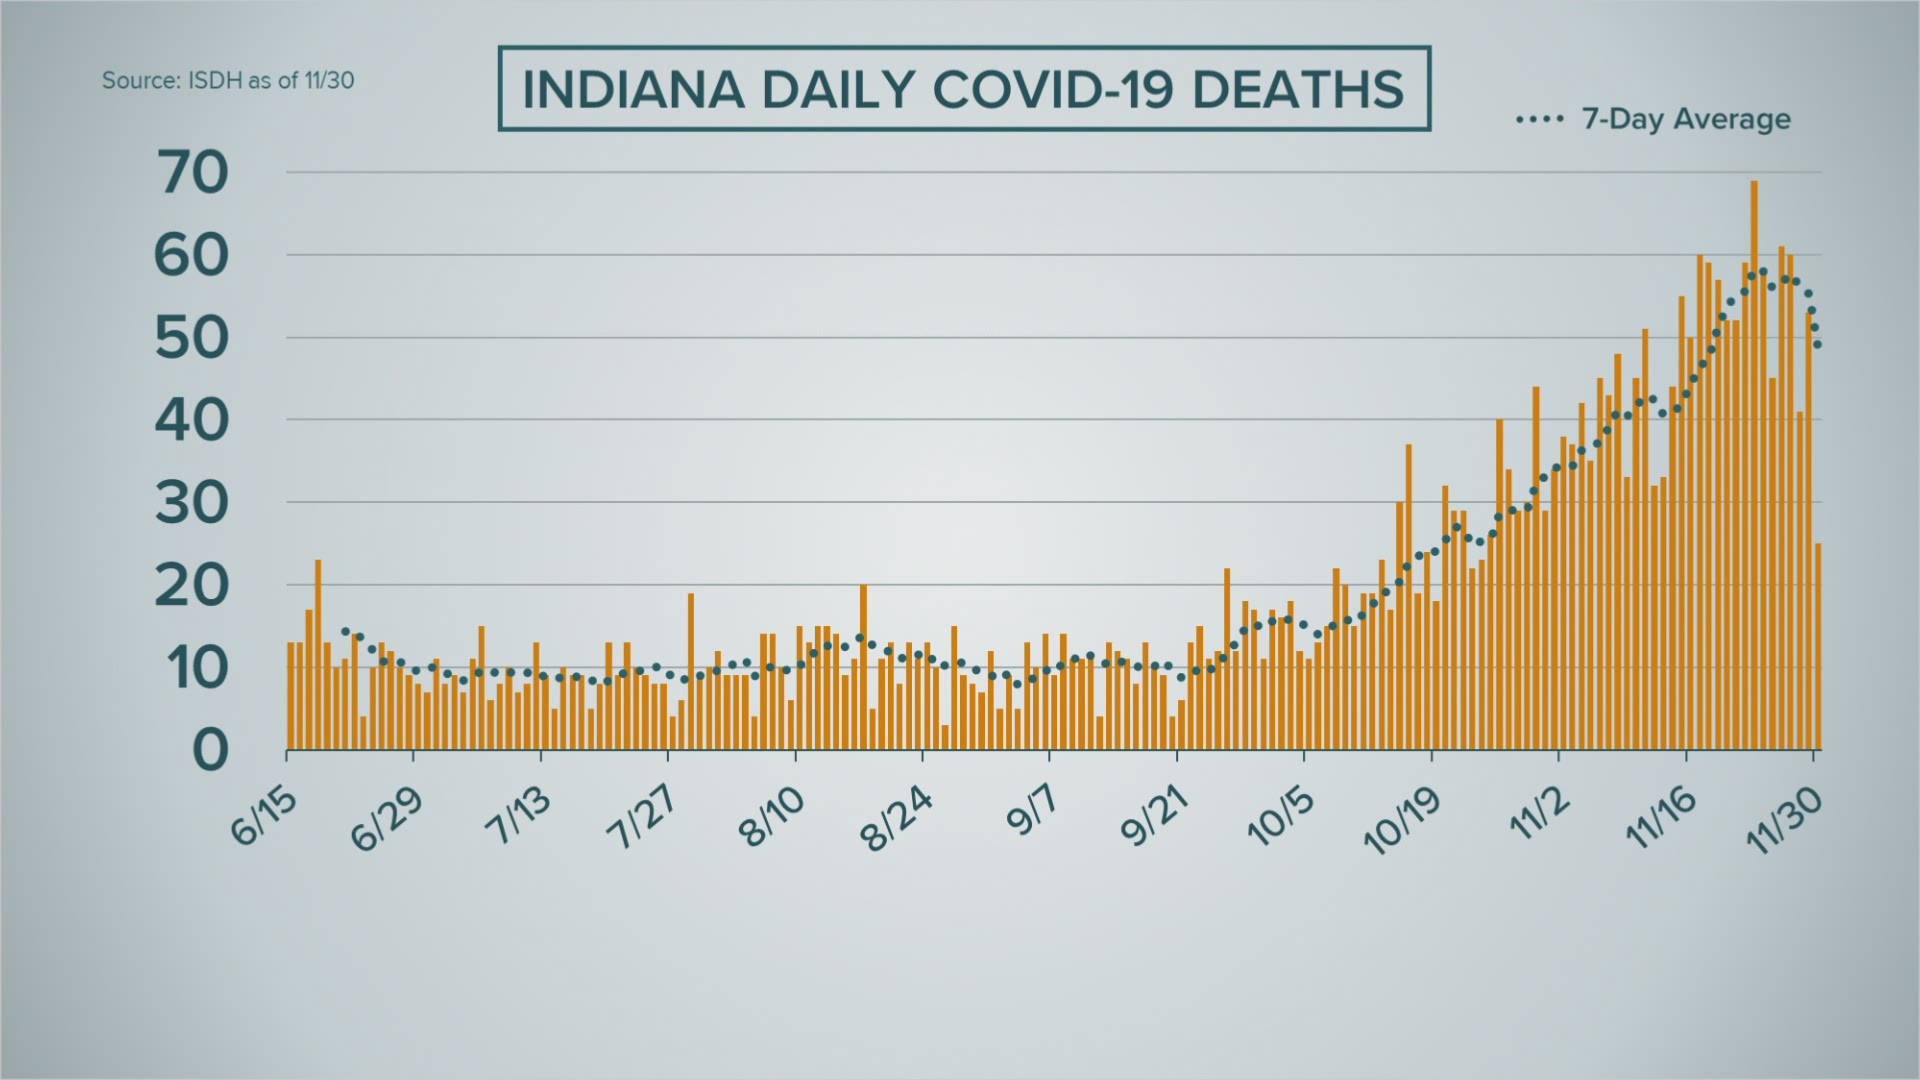 The latest on the coronavirus pandemic in the U.S. and Indiana on Tuesday, Dec. 1, 2020.